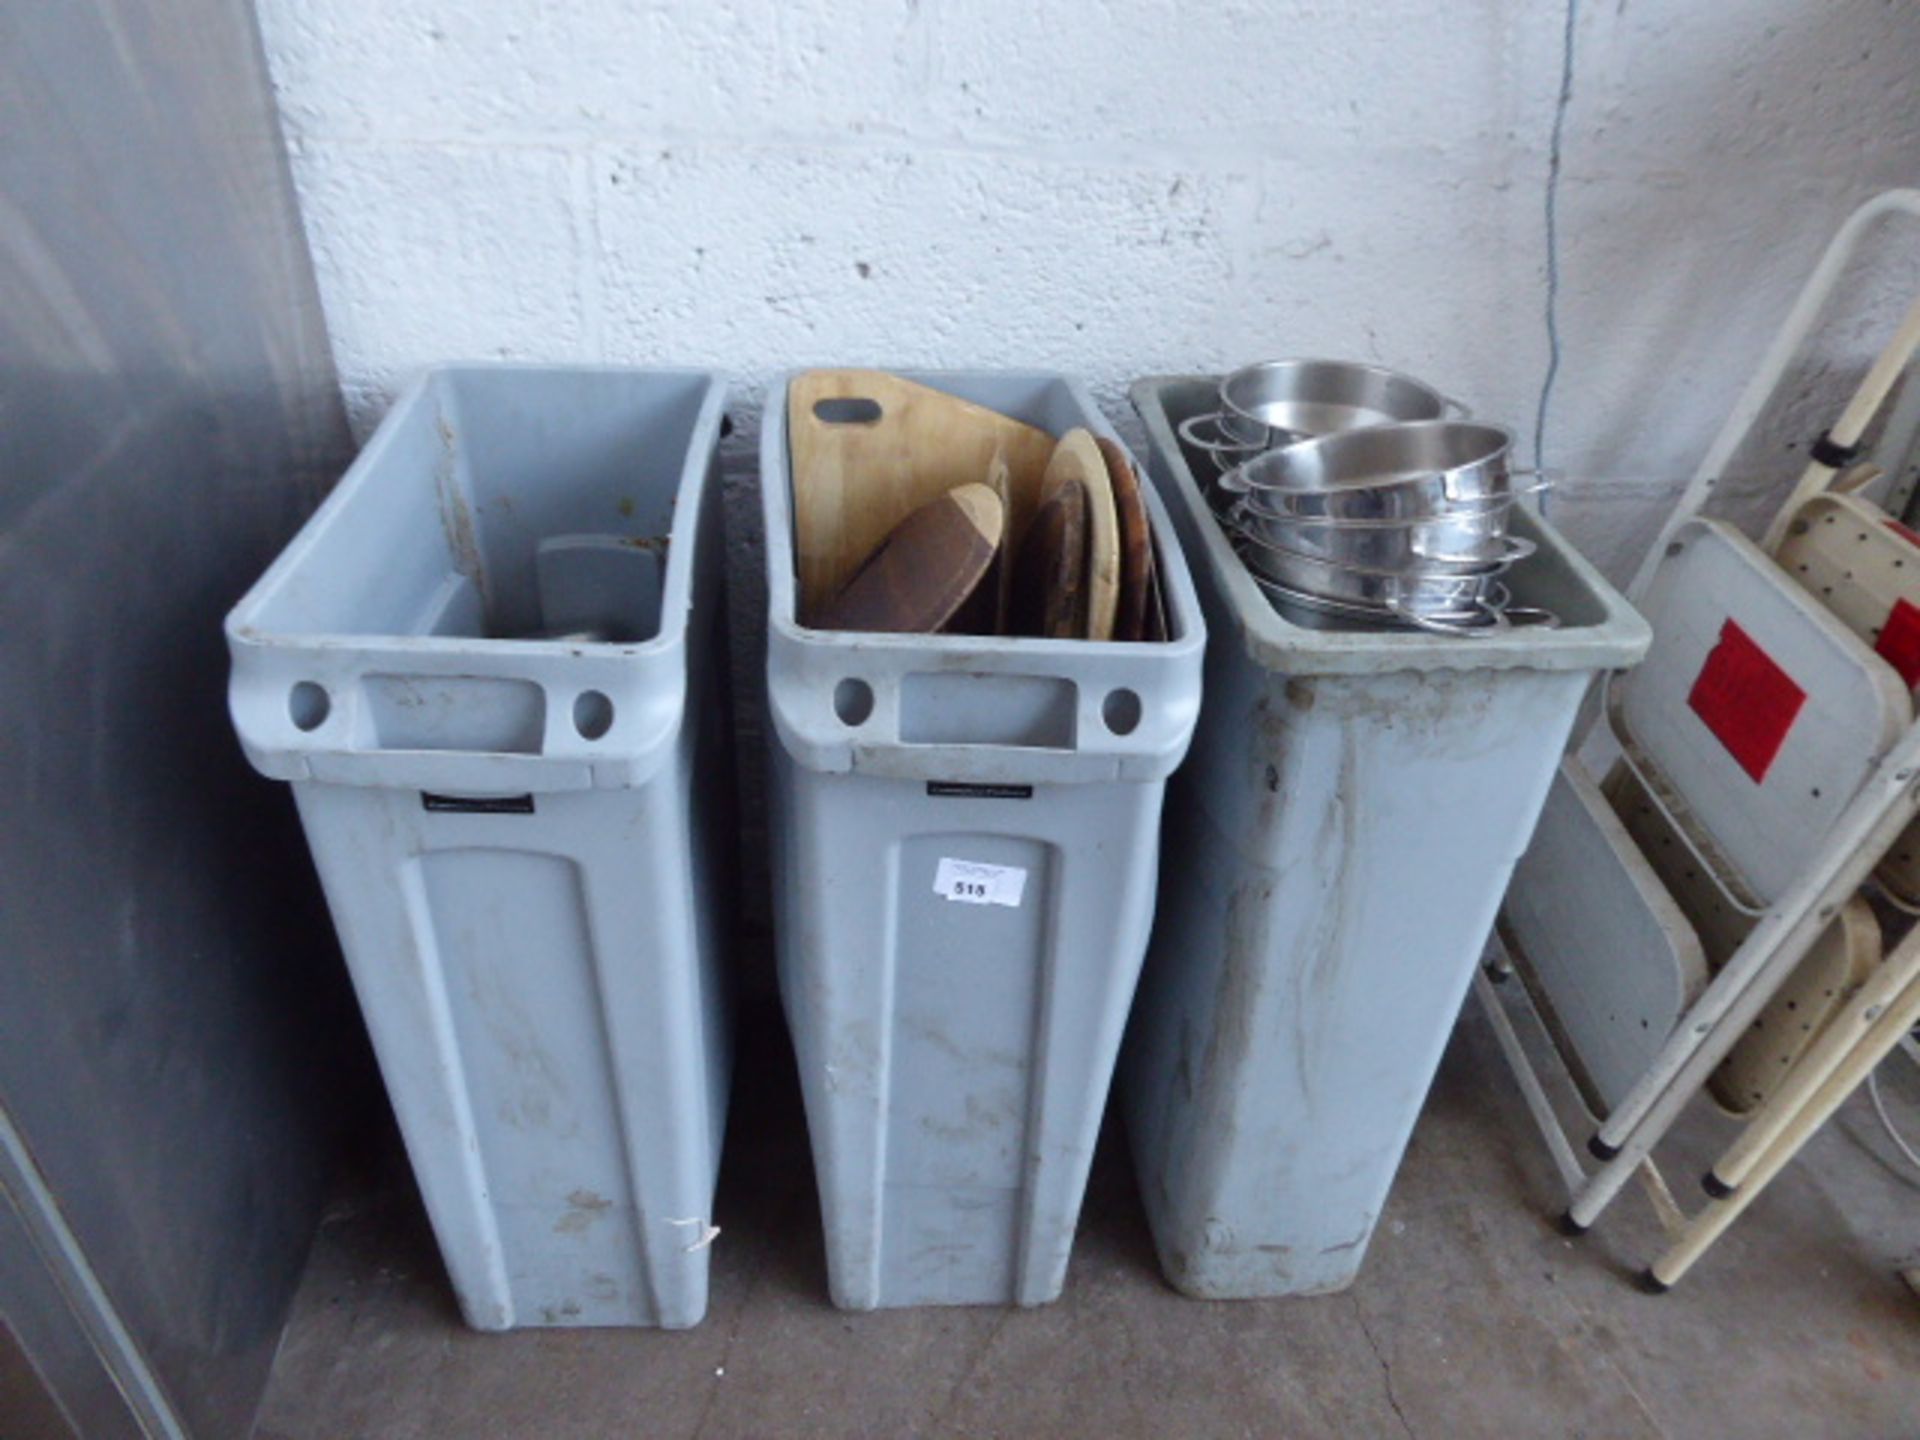 3 Rubbermaid tubs containing wooden serving platters, balti type dishes and small stainless steel